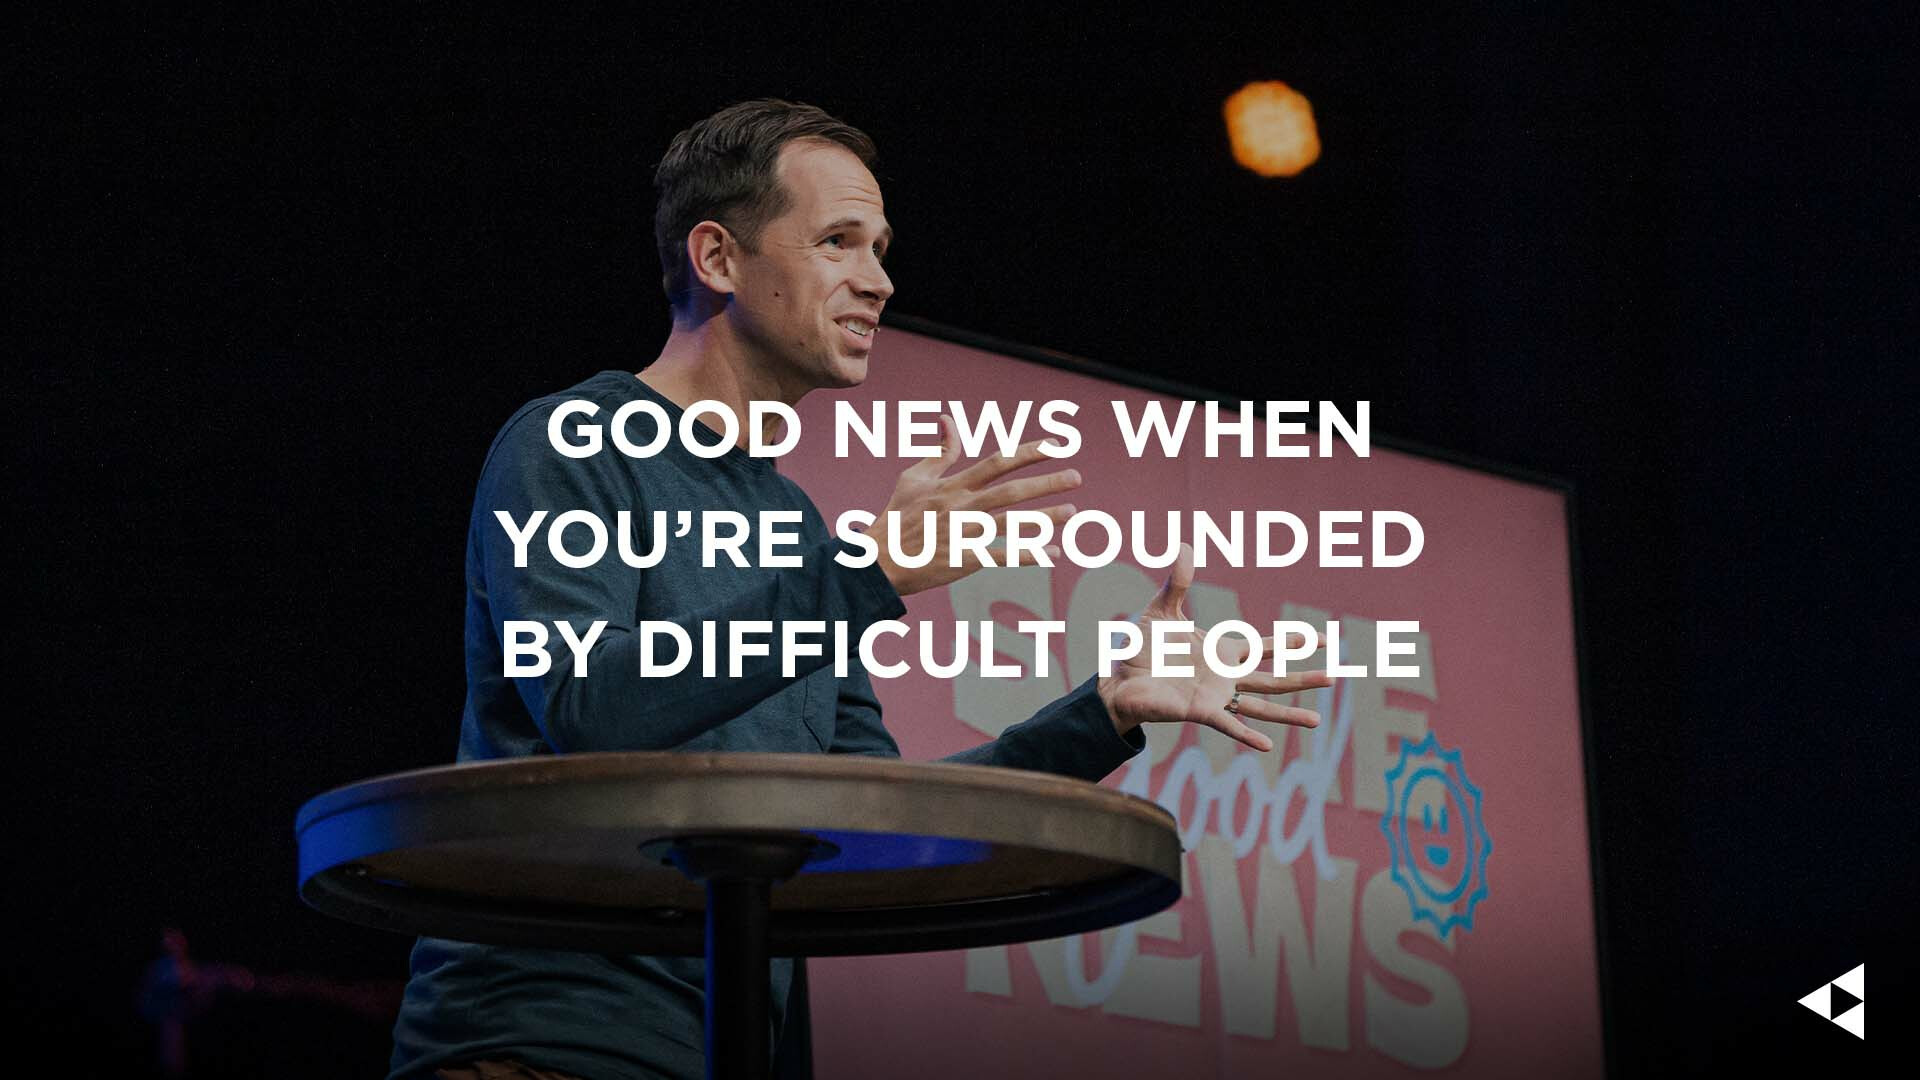 View Message: Good News When You're Surrounded by Difficult People